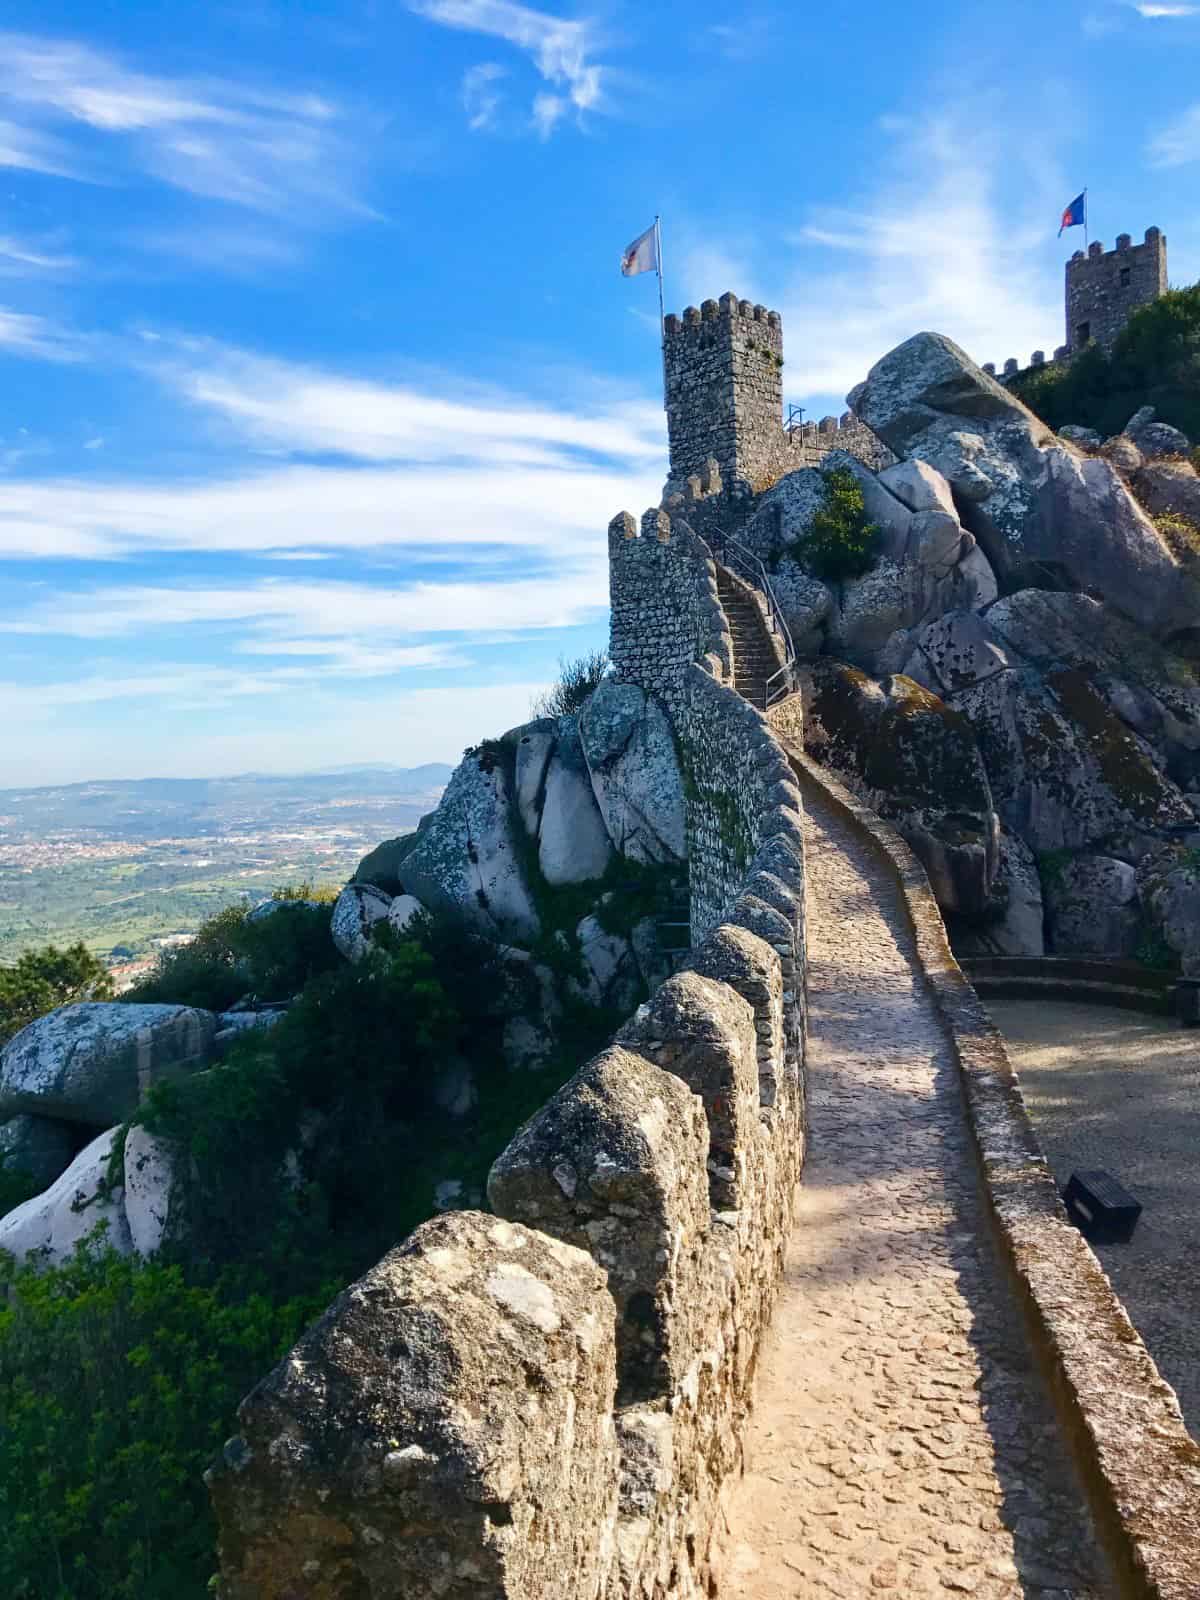 Itinerary ideas for Lisbon, Portugal - Sintra makes an amazing day trip